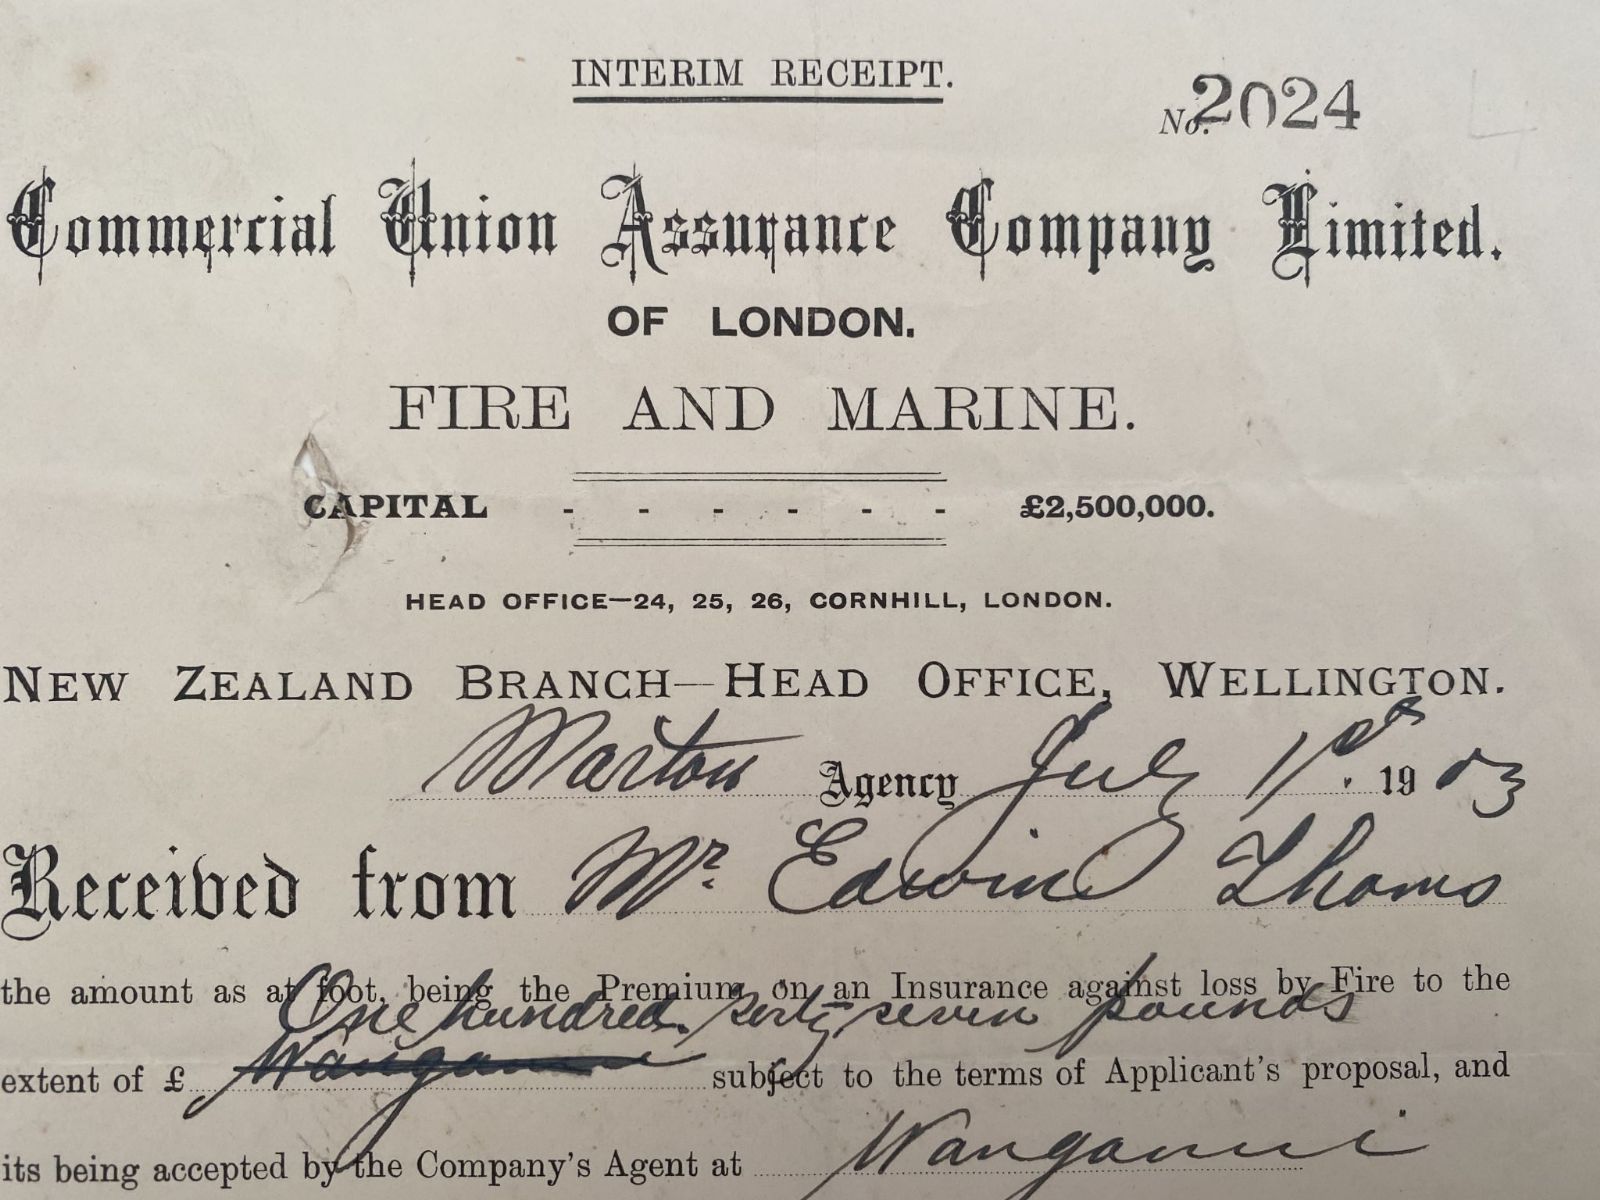 ANTIQUE DOCUMENT: Policy renewal - Commercial Union Assurance Company Ltd. 1903